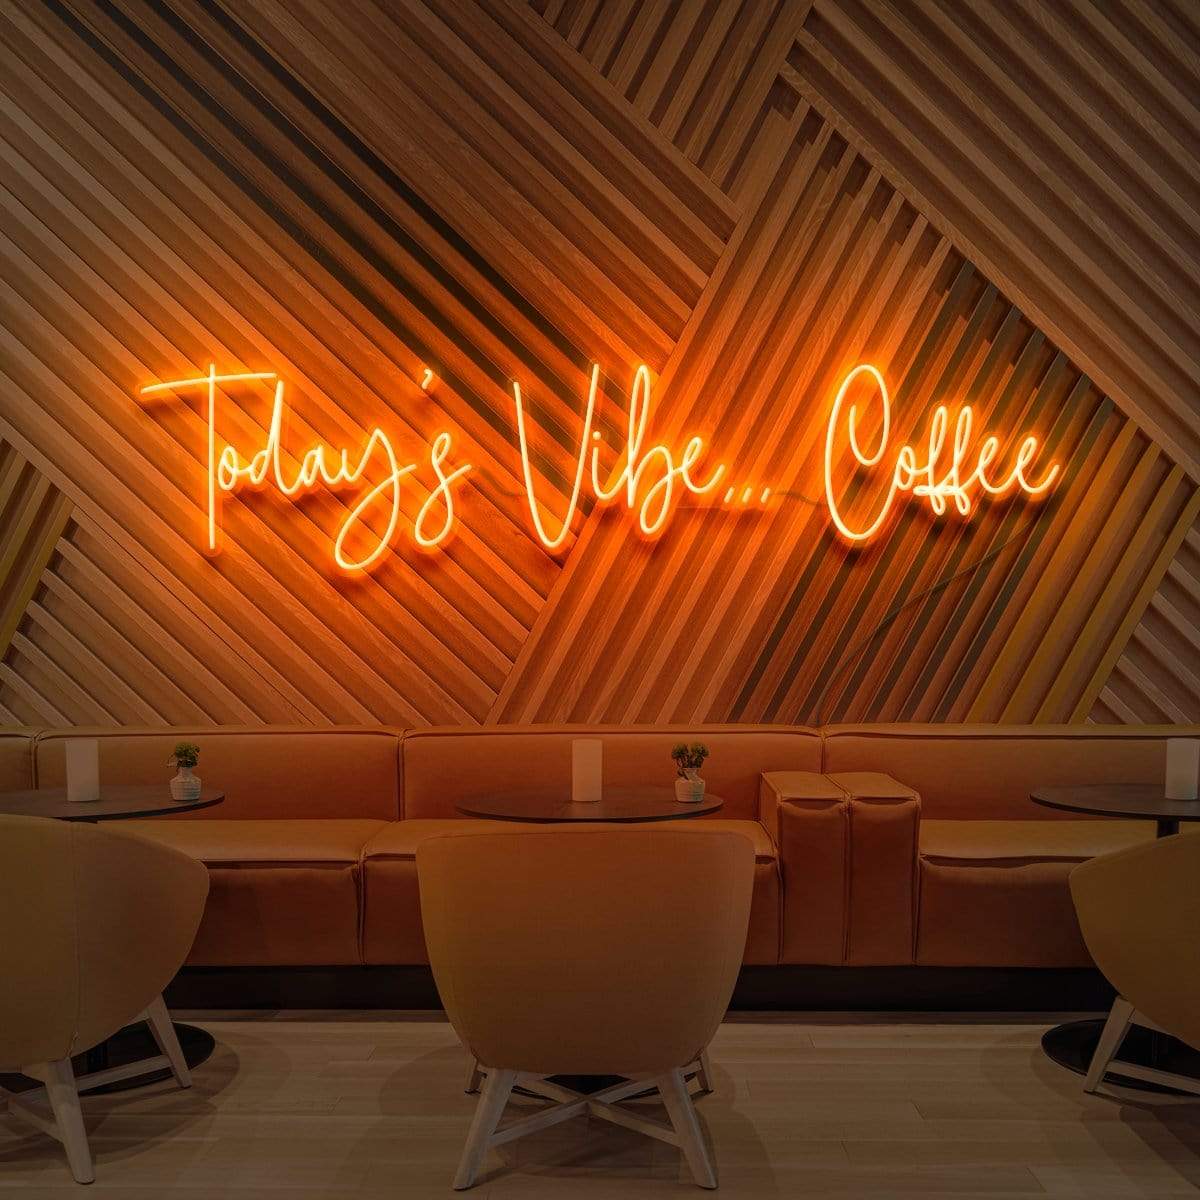 "Today's Vibe... Coffee" Neon Sign for Cafés 90cm (3ft) / Orange / LED Neon by Neon Icons